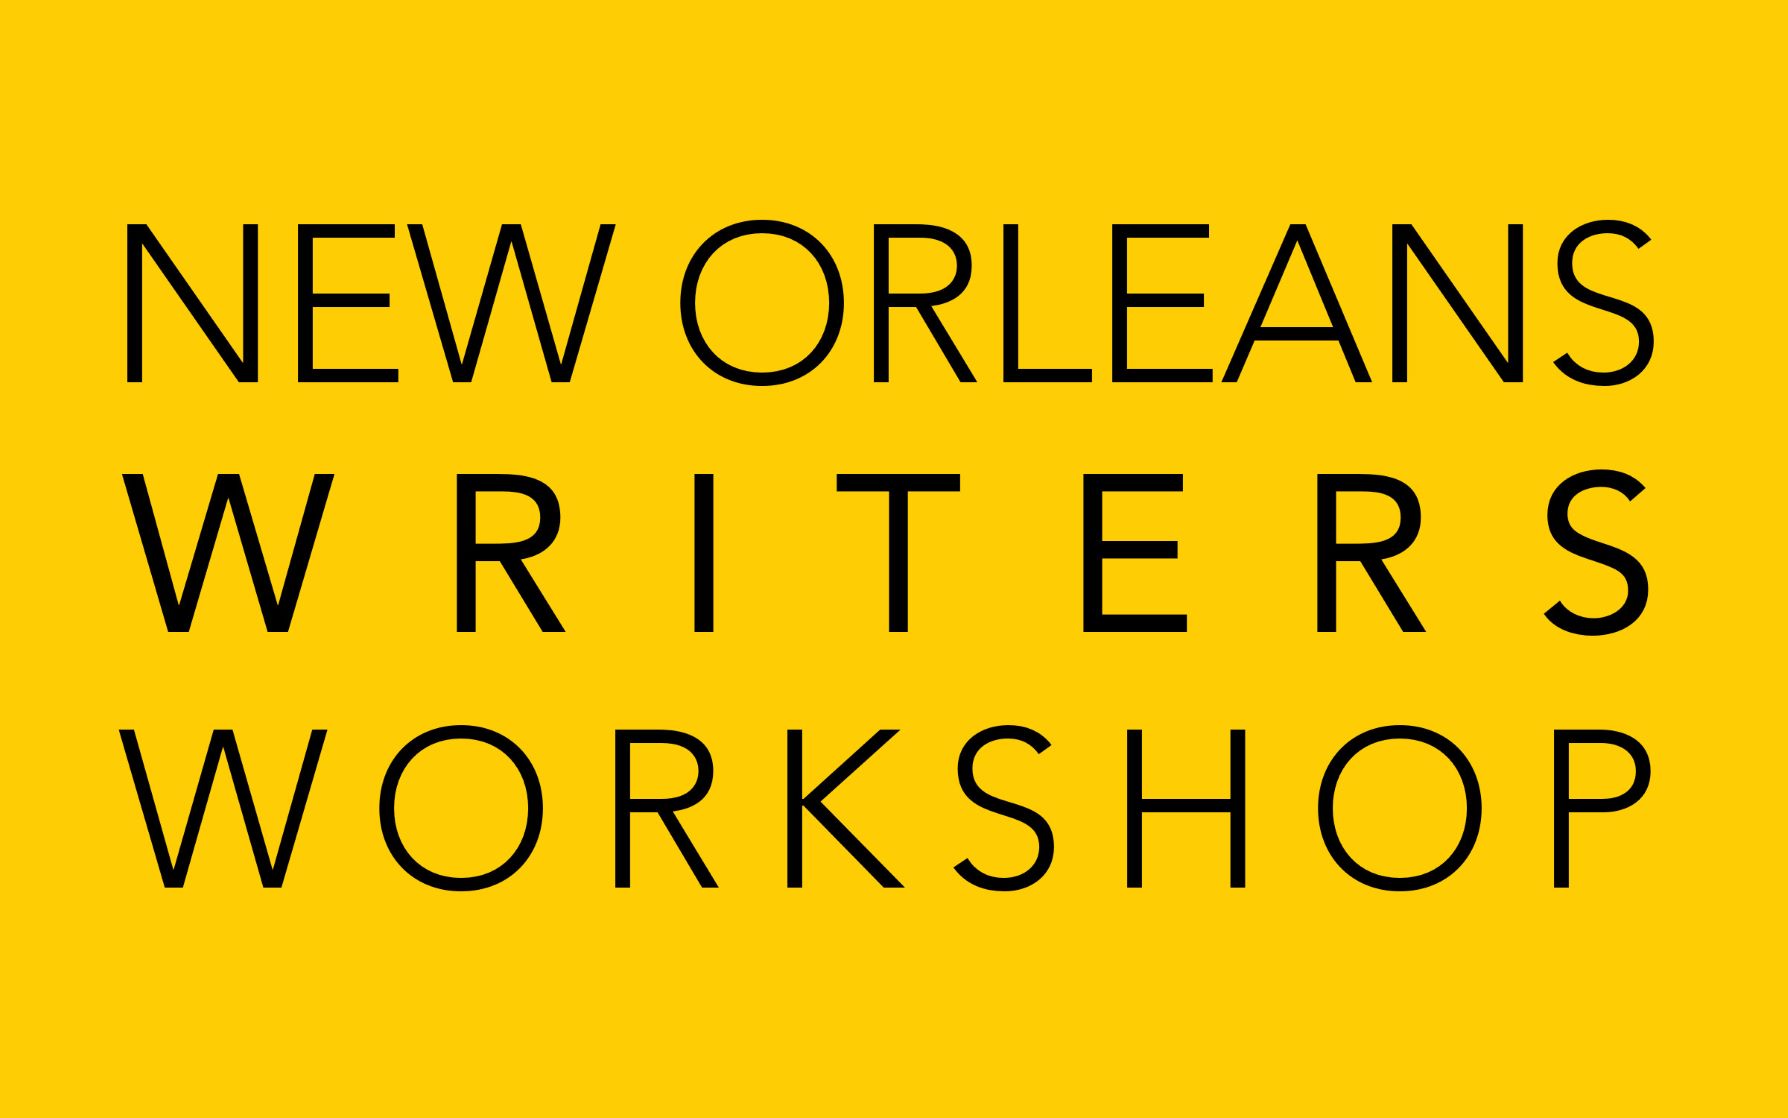 creative writing classes new orleans